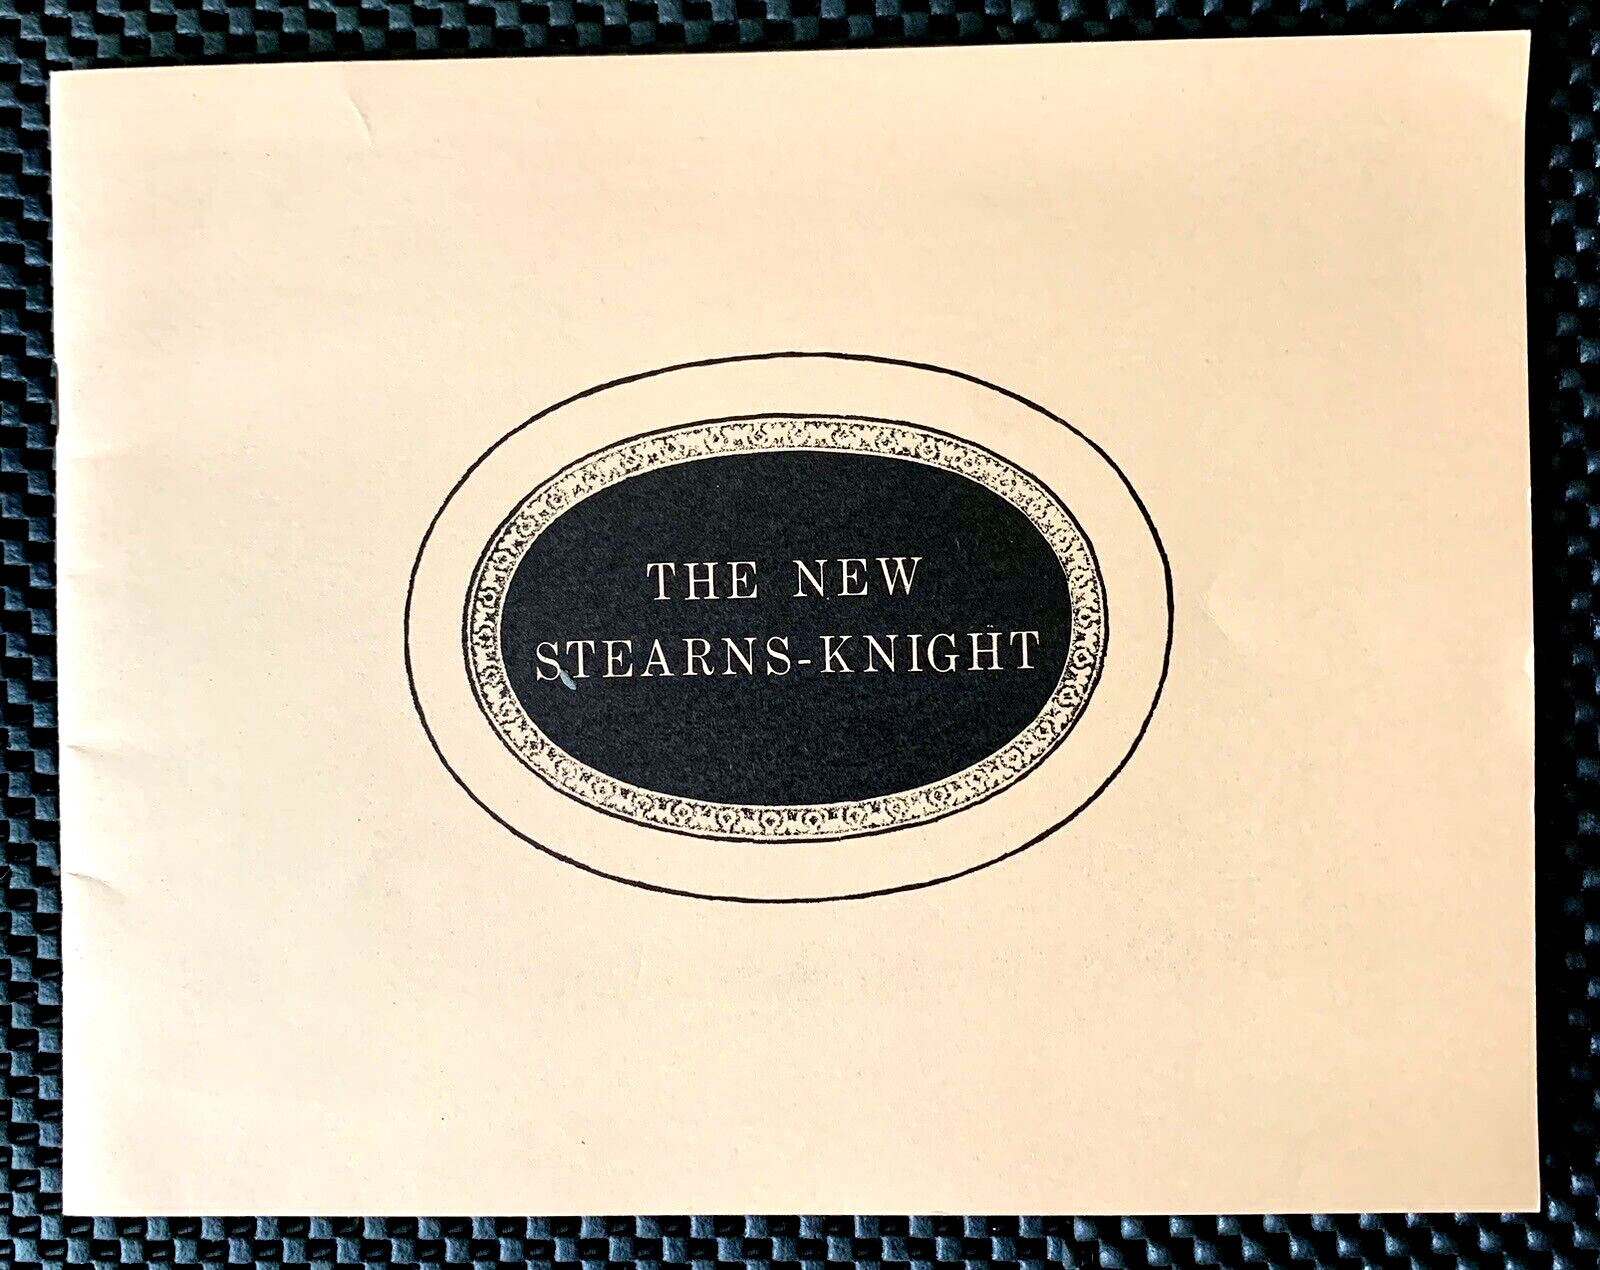 THE NEW STEARNS-KNIGHT AMERICAN LUXURY CARS MANUFACTURED FROM 1911-1929 BOOKLET